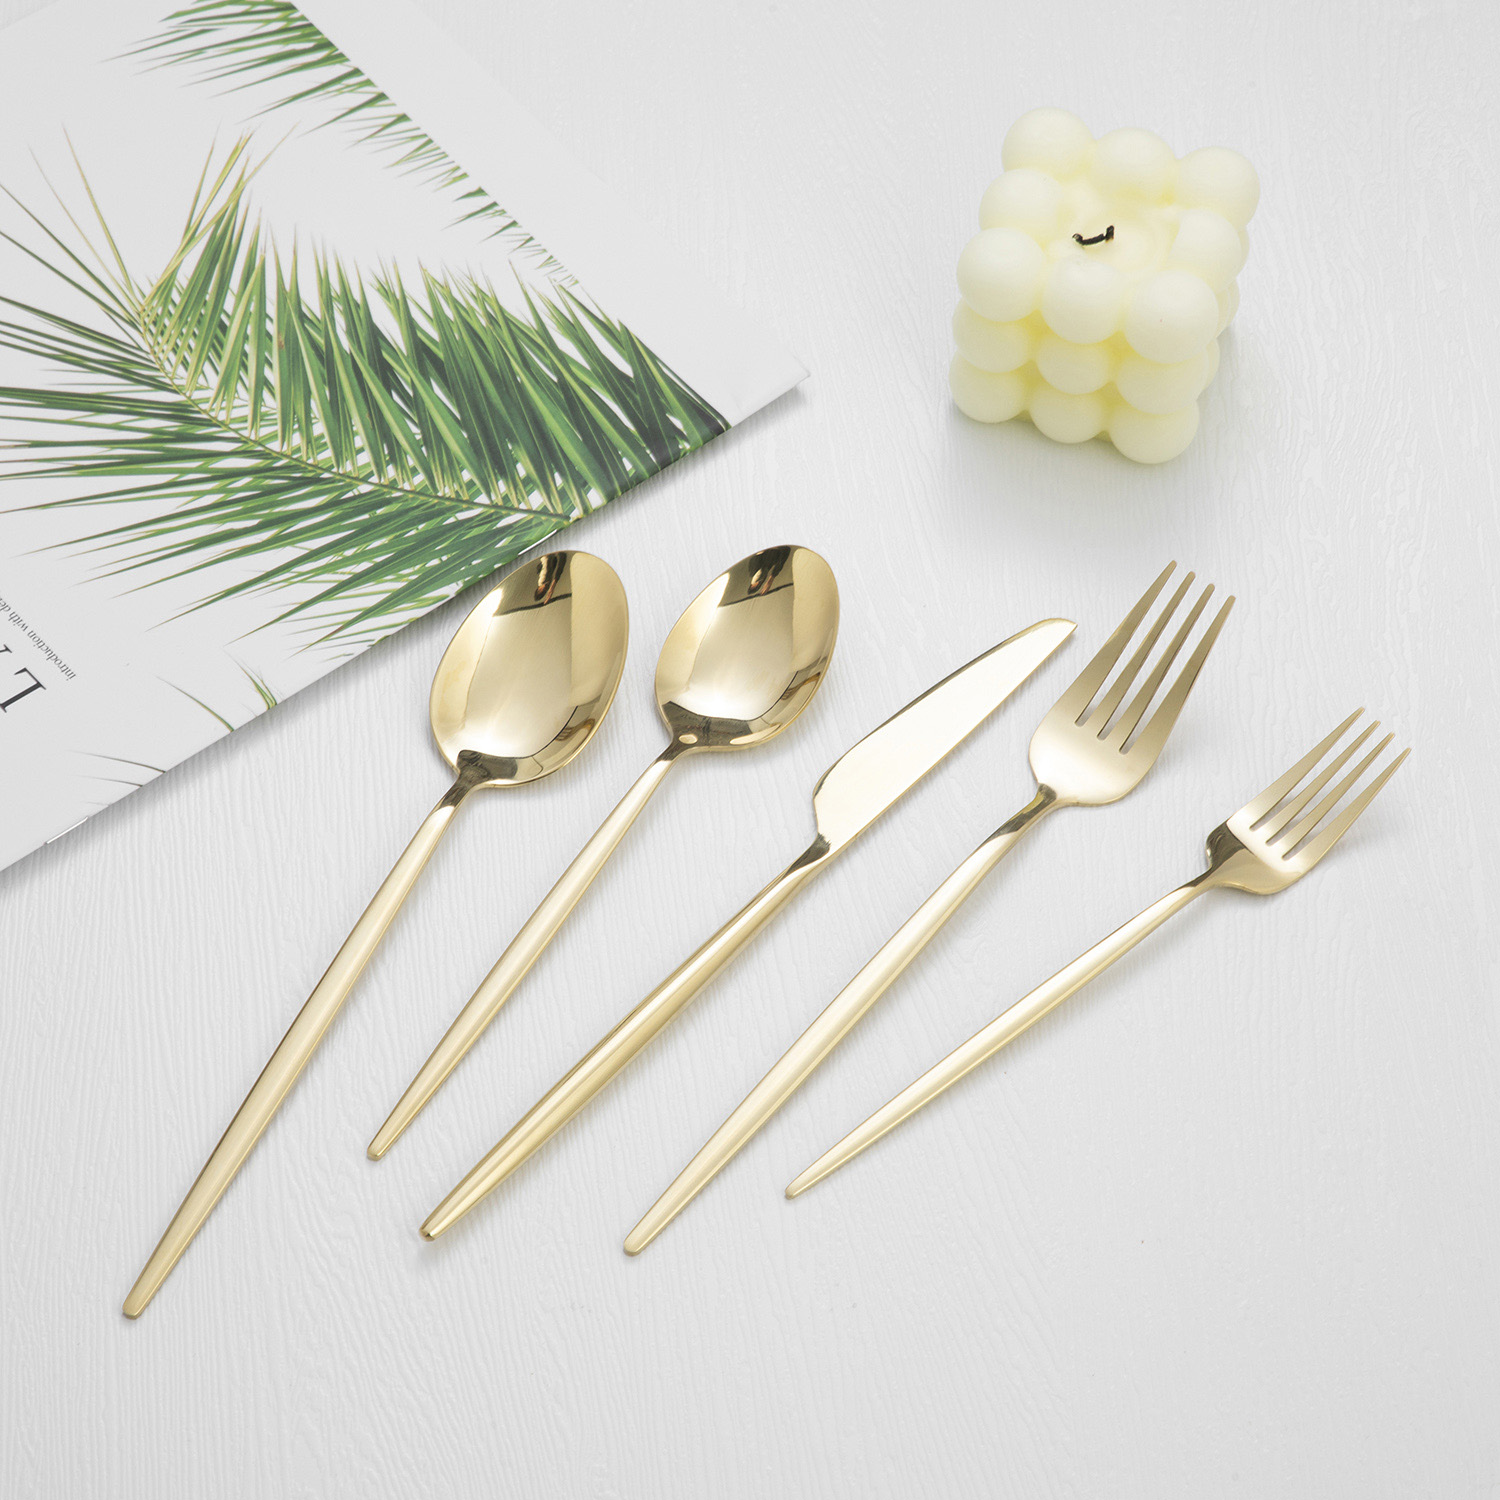 Wholesale Bulk 20 Pcs Portugal Gold Plated Flatware Custom Spoon Fork and Knife Stainless Steel Cutlery Set for Wedding